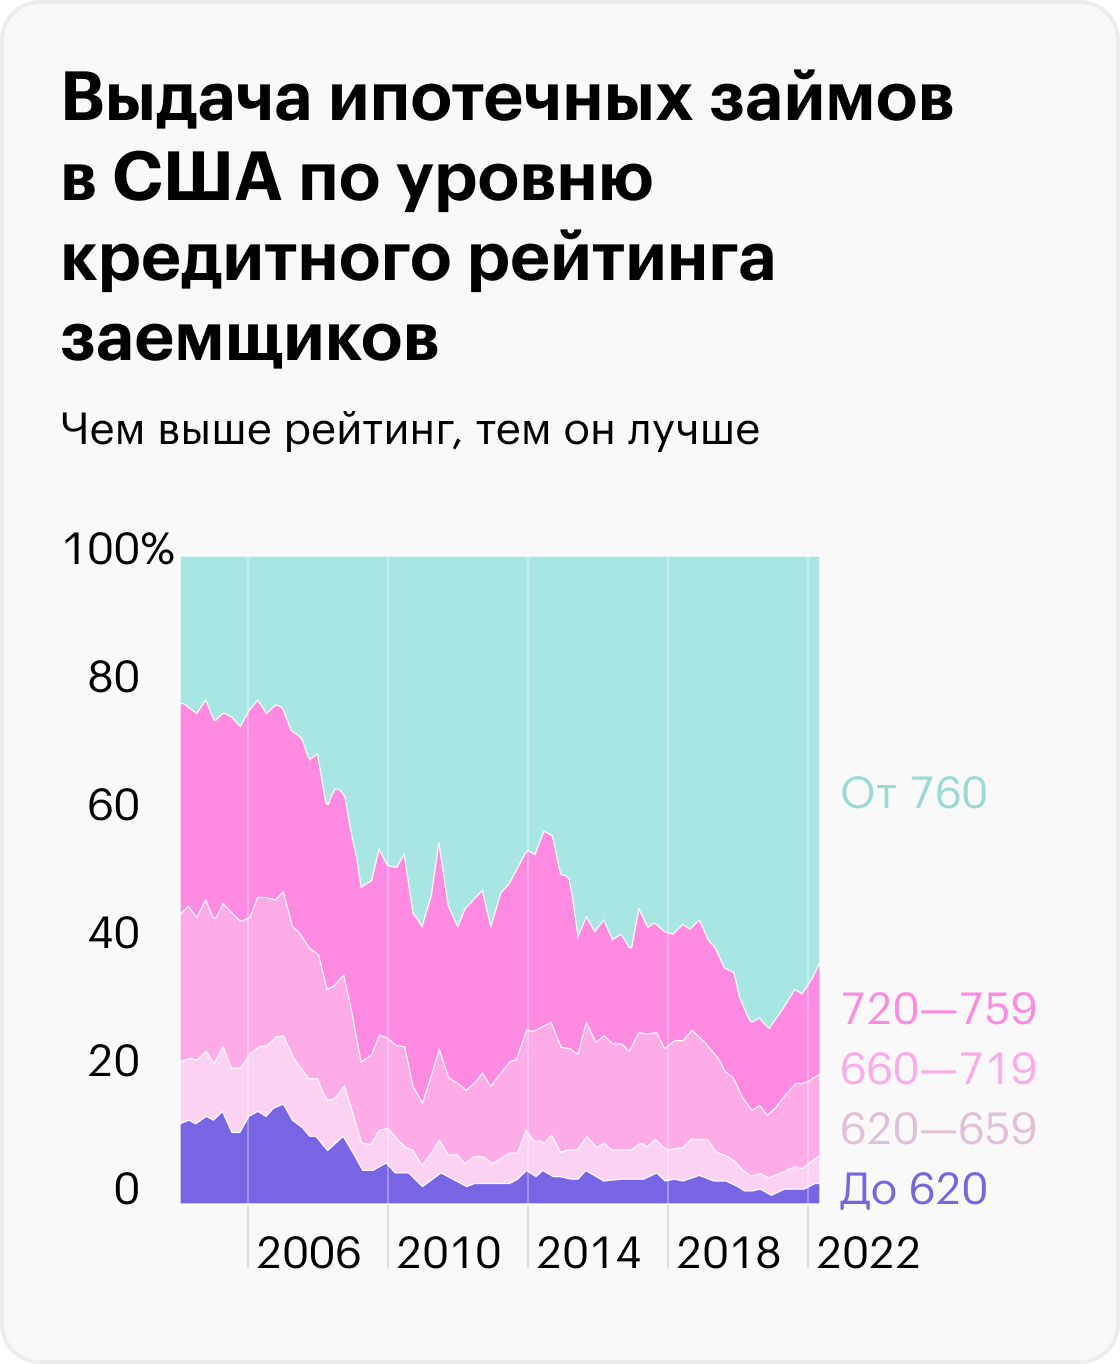 Источник: Daily Shot, The quality of mortgage lending